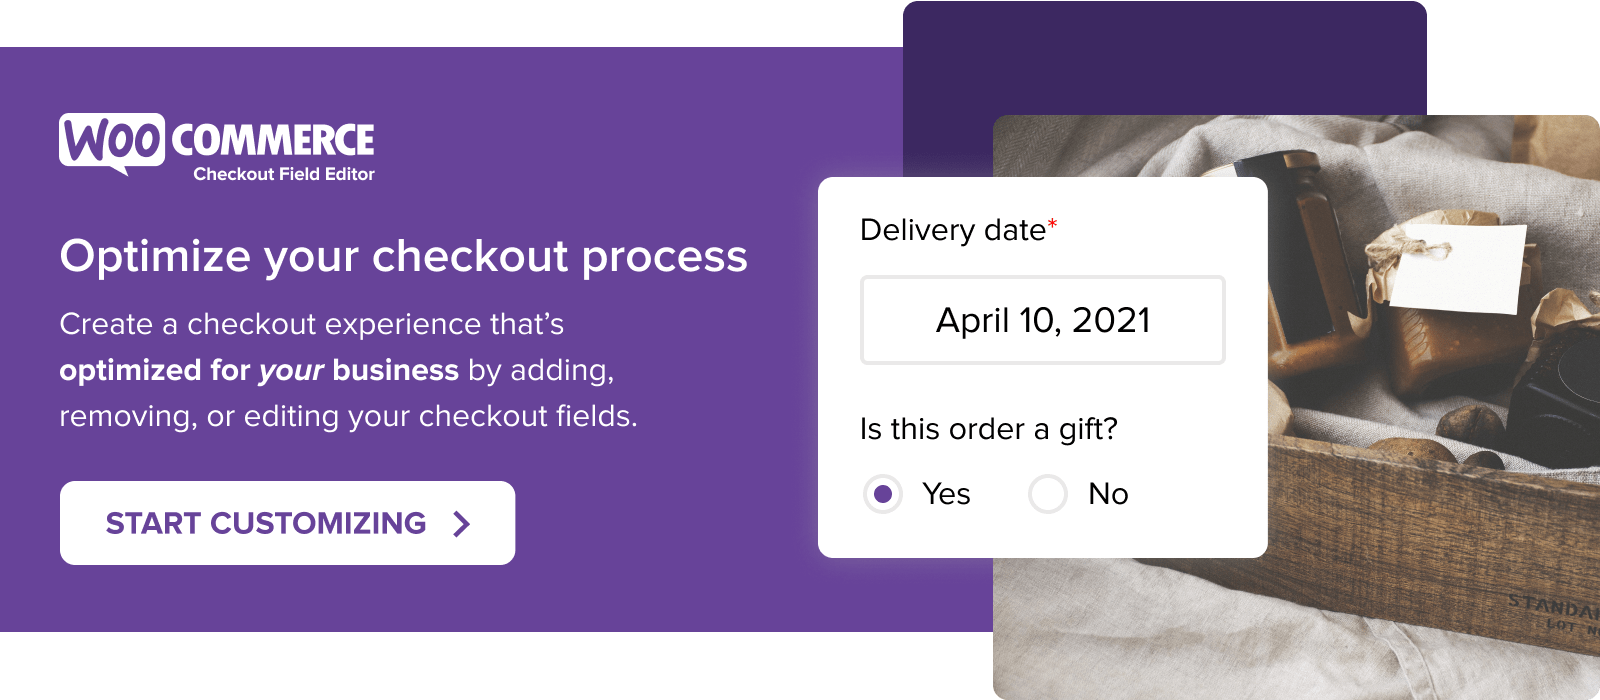 Optimize your checkout process with WooCommerce Checkout Field Editor